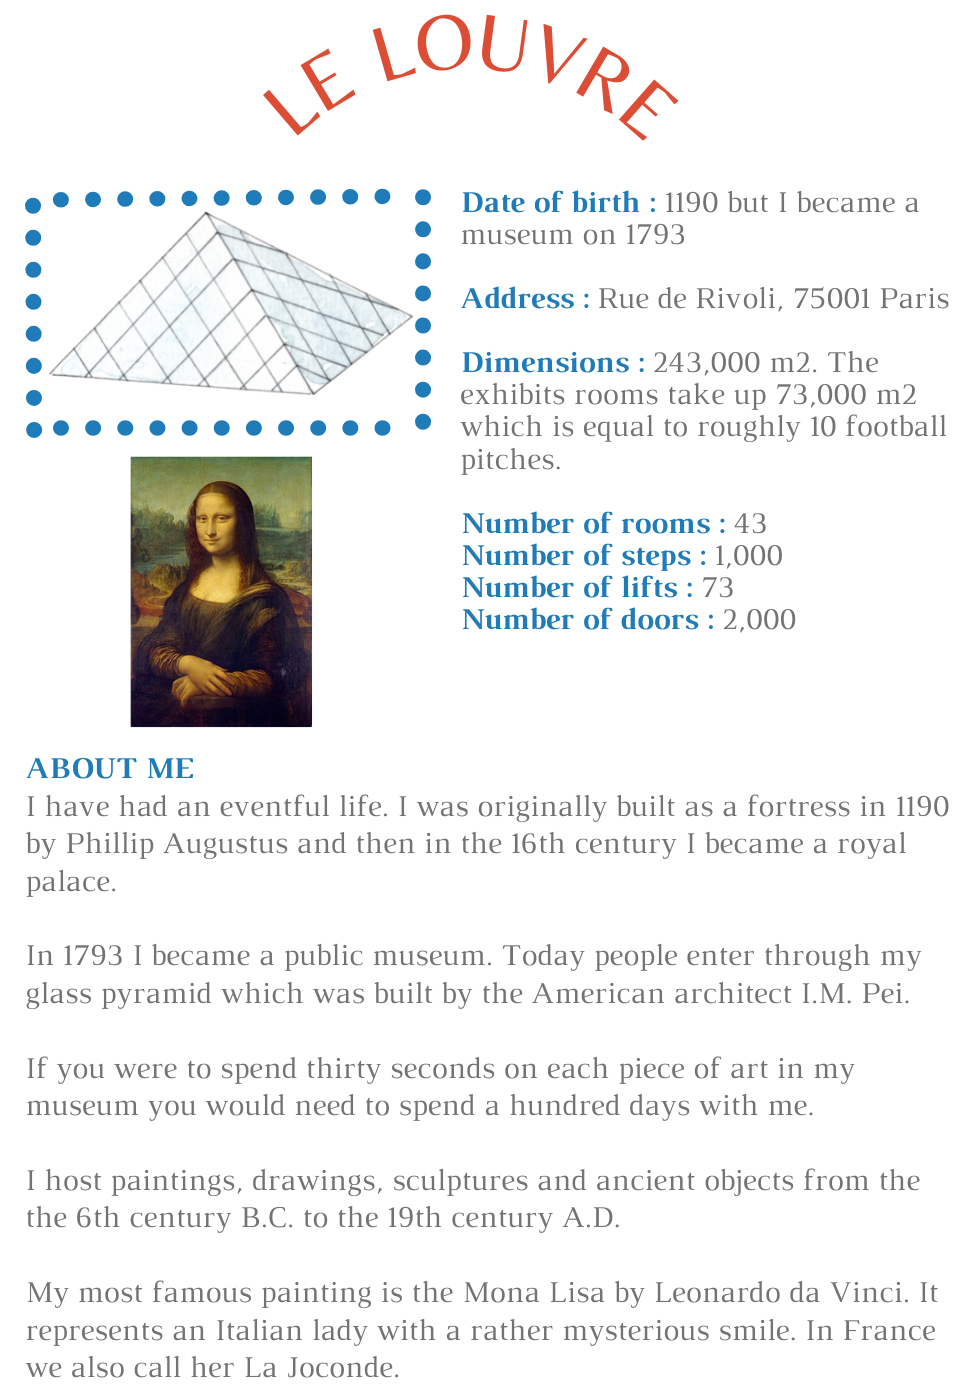 All about the Louvre - French learning family club - Fun facts about the Louvre for kids